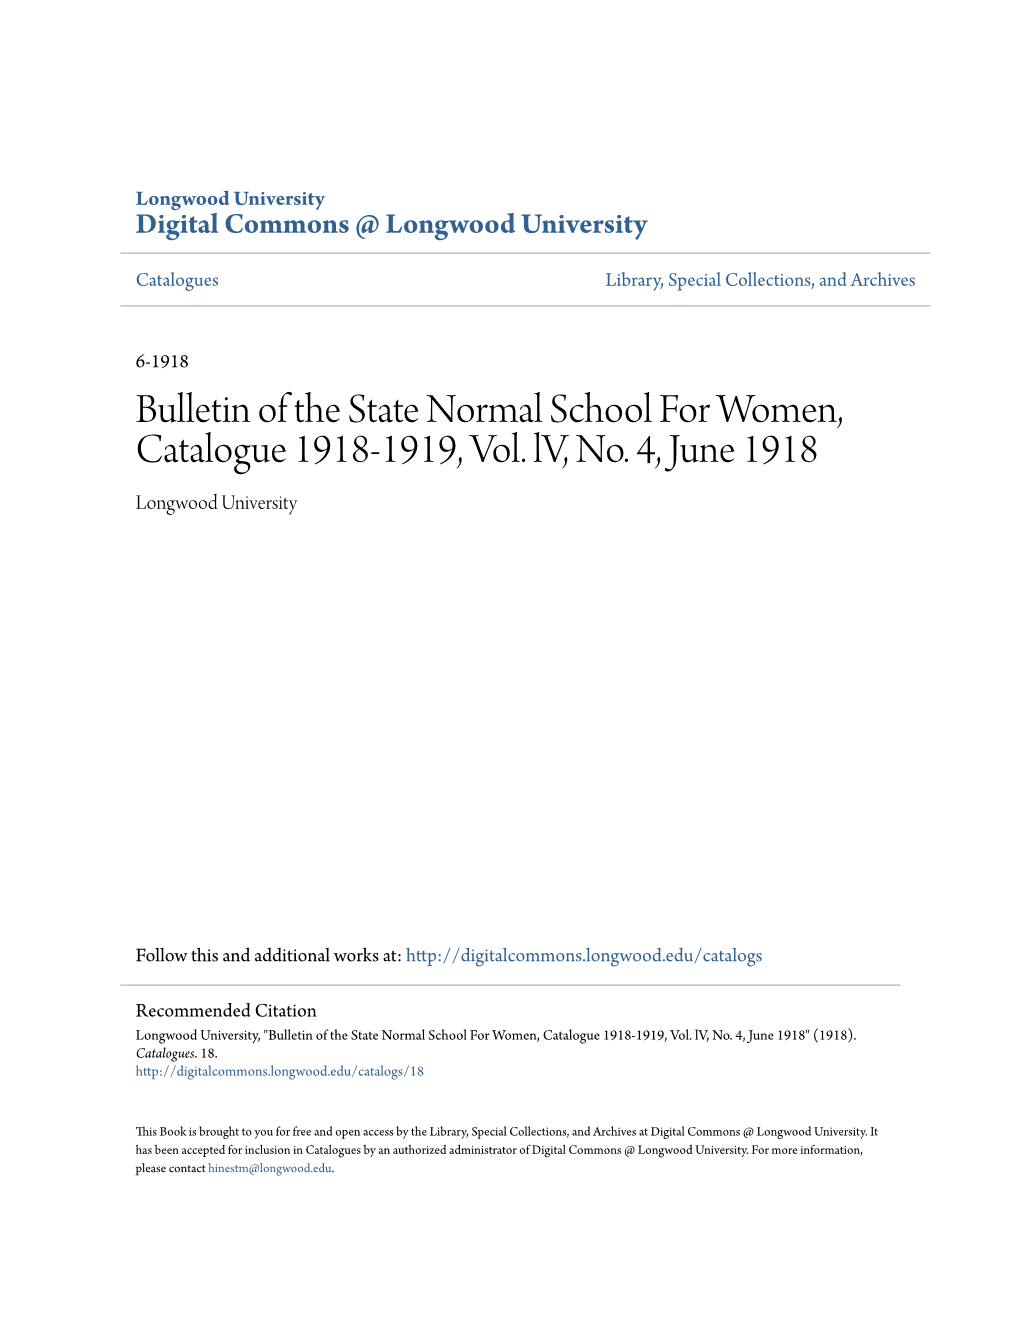 Bulletin of the State Normal School for Women, Catalogue 1918-1919, Vol